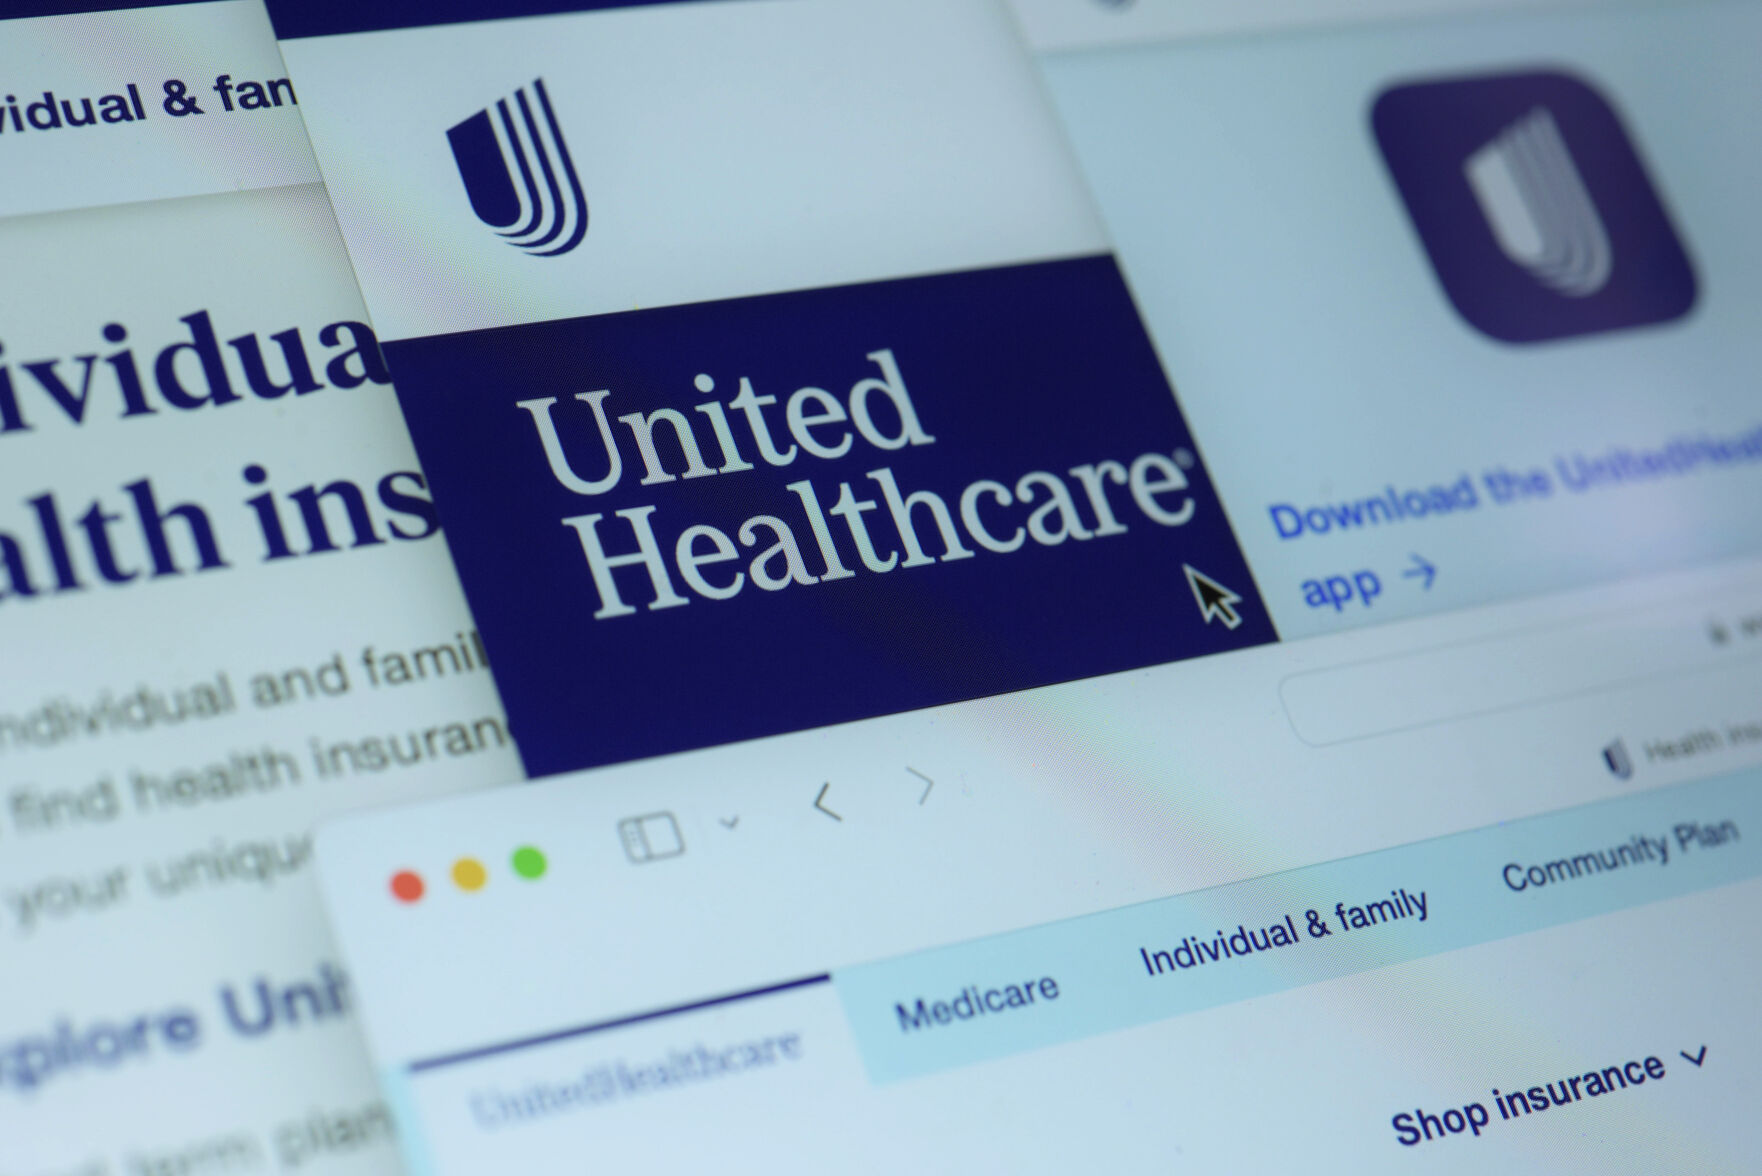 <p>FILE - Pages from the United Healthcare website are displayed on a computer screen, Feb. 29, 2024, in New York. UnitedHealth Group trounced first-quarter expectations even as costs from a cyberattack to its Change Healthcare business ate into its performance. The health care giant also Tuesday, April 16, that care patterns in the year’s first quarter met its expectations after soaring medical costs at the end of last year surprised Wall Street. (AP Photo/Patrick Sison, File)</p>   PHOTO CREDIT: Patrick Sison